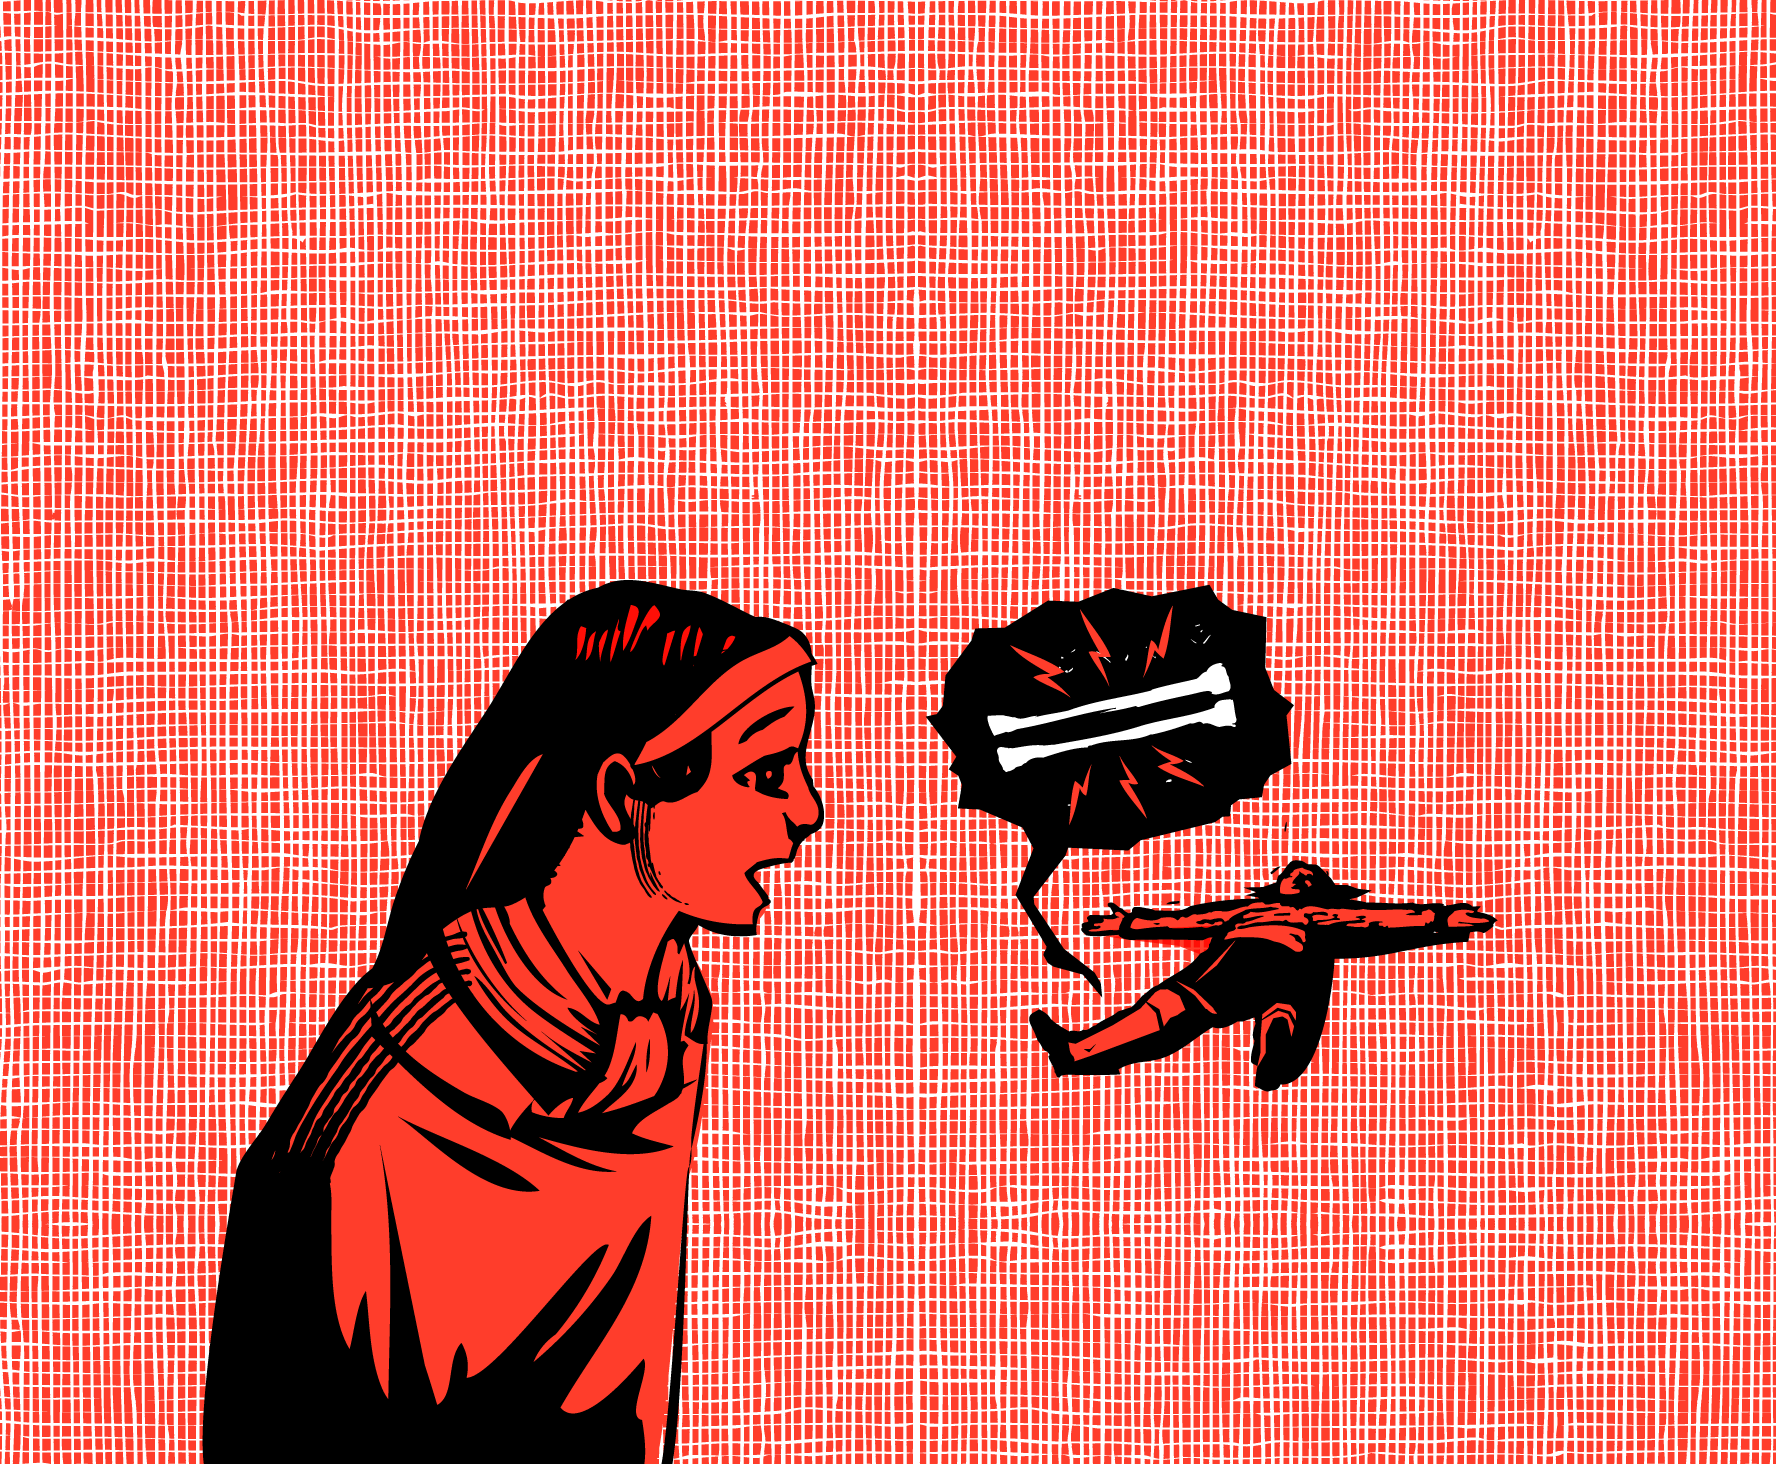 Illustration of a nun near a child on the ground, with a speech bubble with bones inside it.